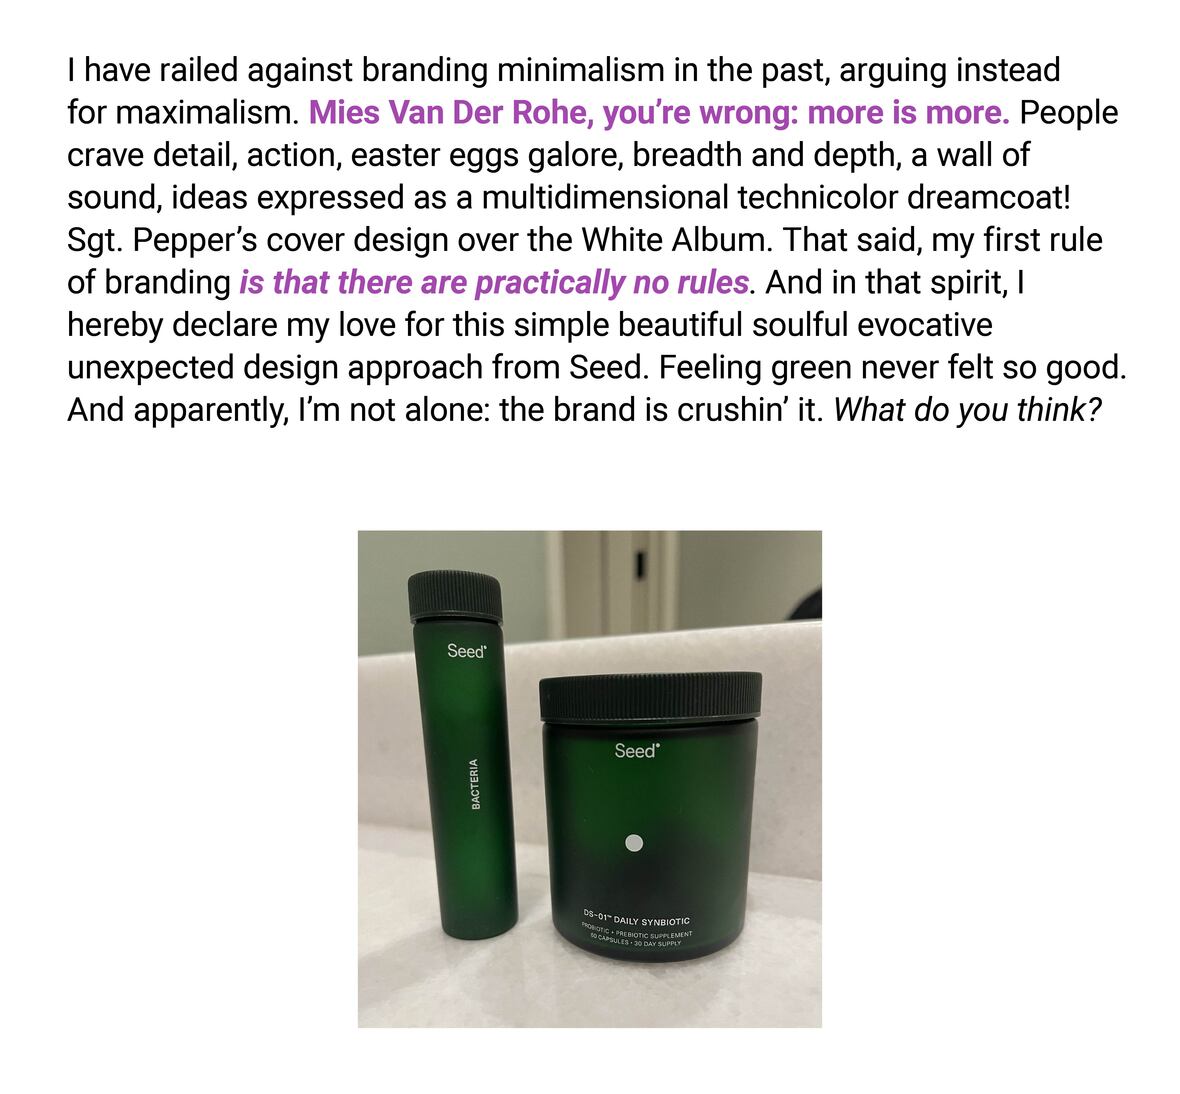 The image shows two green cylindrical products from the brand 'Seed', one a bottle and the other a jar. The text reads: "I have railed against branding minimalism in the past, arguing instead for maximalism. Mies Van Der Rohe, you’re wrong: more is more. People crave detail, action, easter eggs galore, breadth and depth, a wall of sound, ideas expressed as a multidimensional technicolor dreamcoat! Sgt. Pepper’s cover design over the White Album. That said, my first rule of branding is that there are practically no rules. And in that spirit, I hereby declare my love for this simple beautiful soulful evocative unexpected design approach from Seed. Feeling green never felt so good. And apparently, I’m not alone: the brand is crushin’ it. What do you think?"